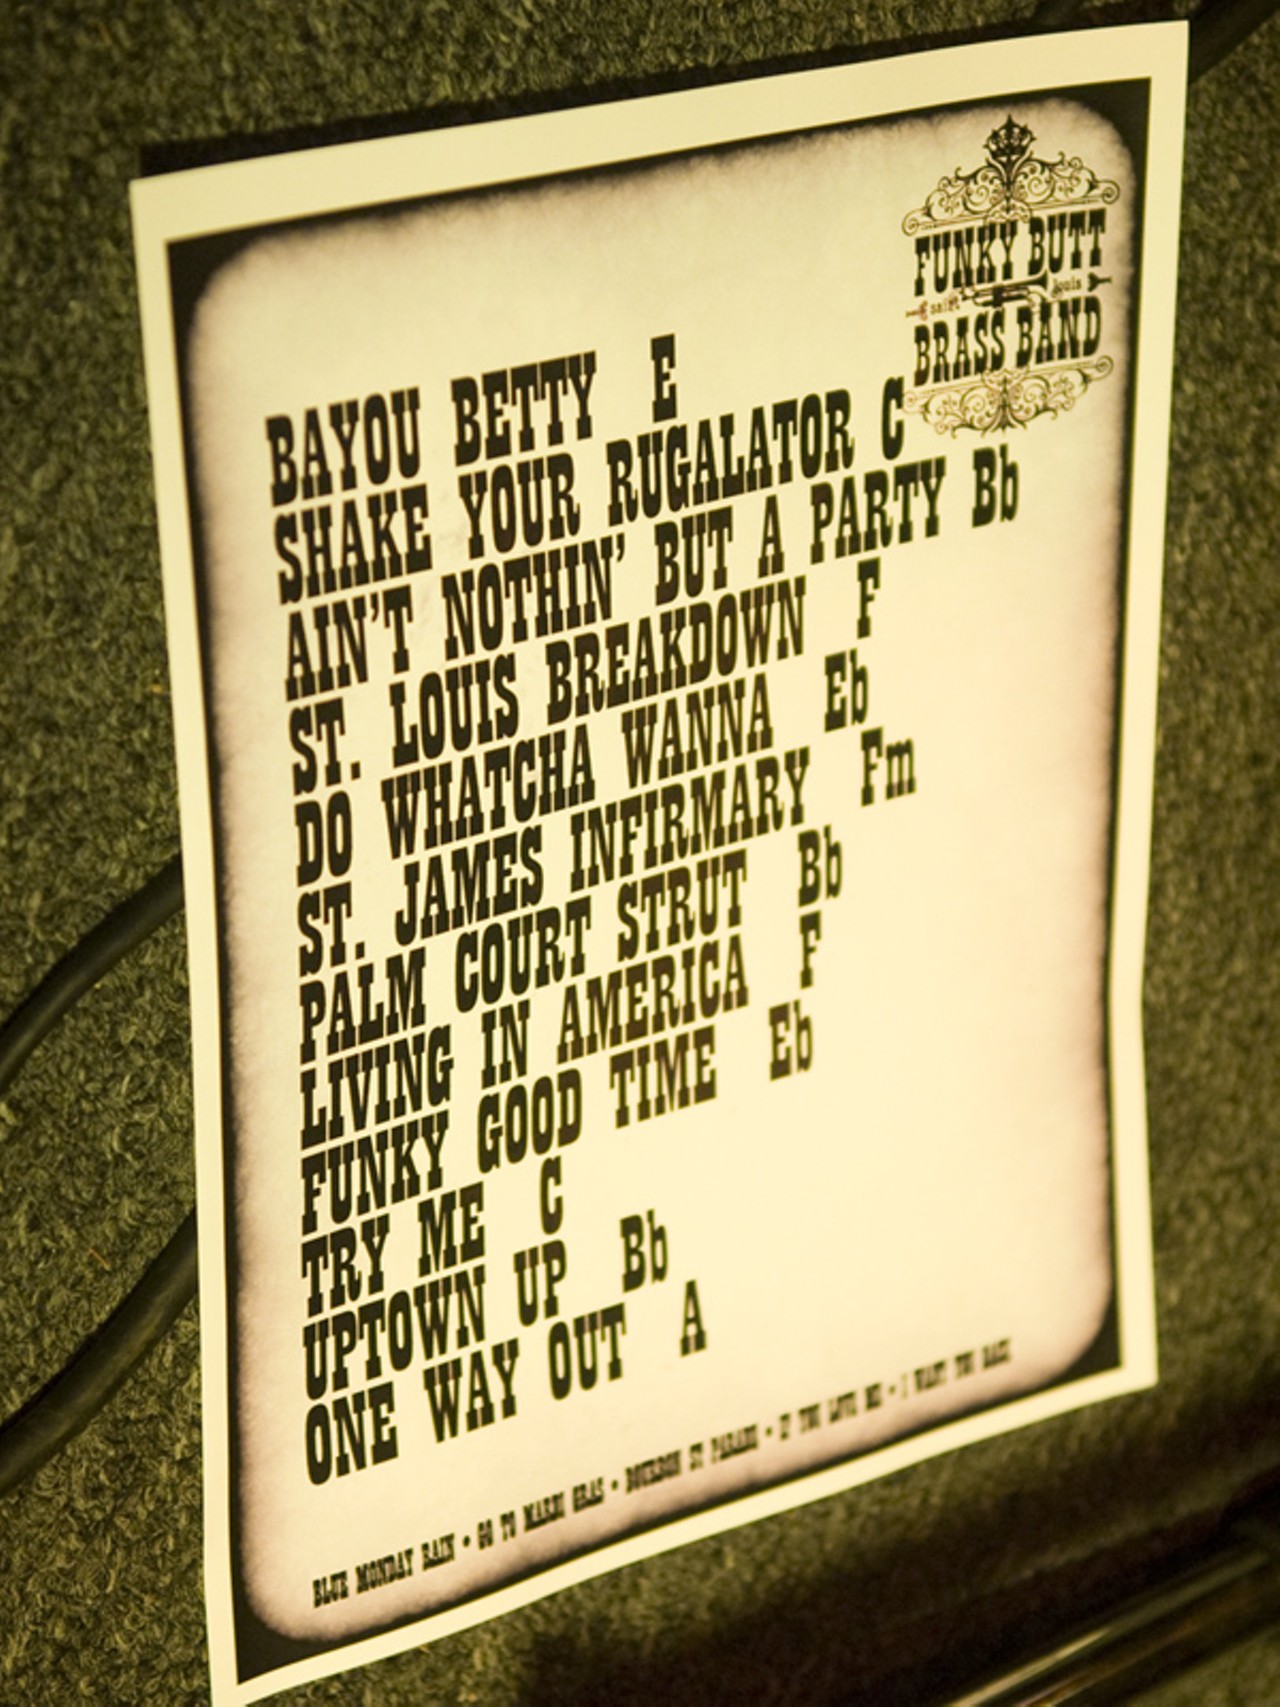 The Funky Butt Brass Band's impressive looking setlist.